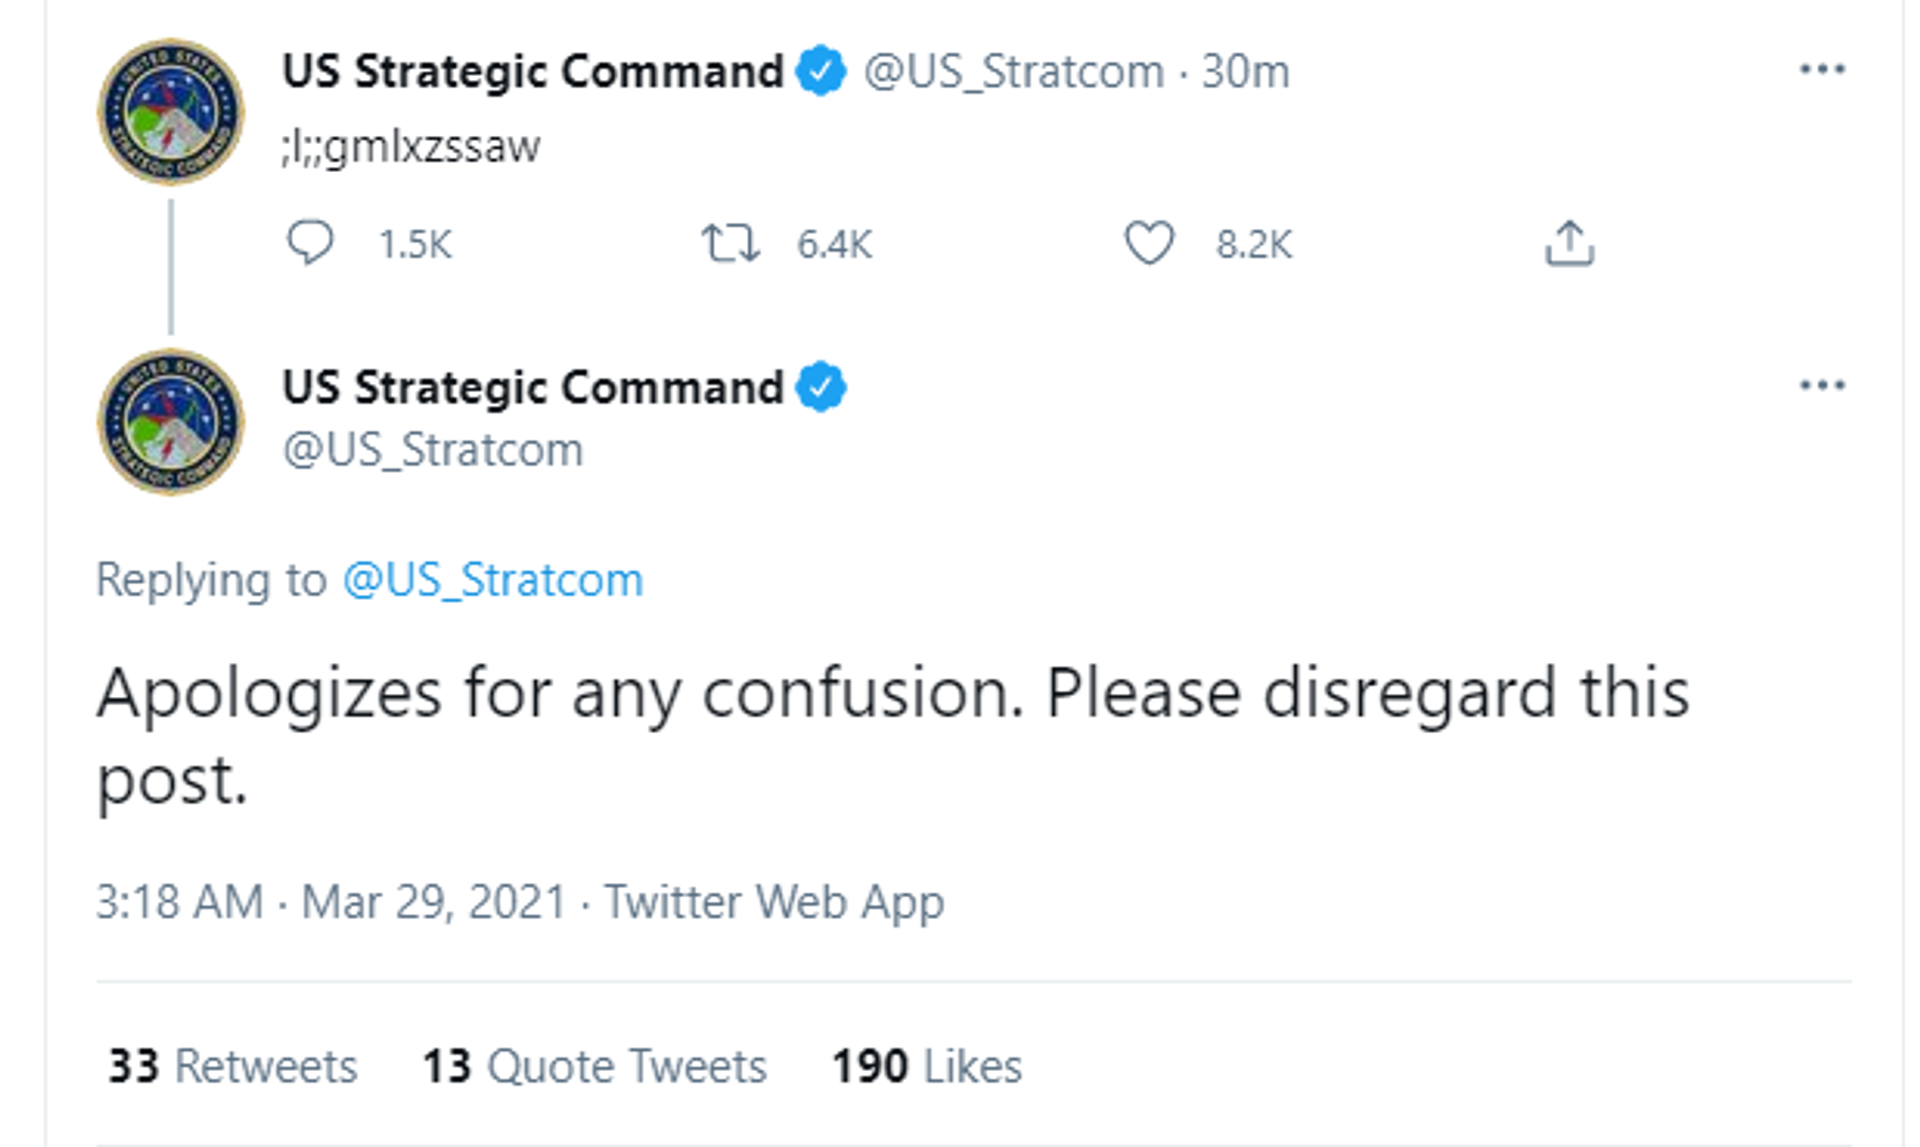 US Strategic Command Explains Cryptic Tweet and It Was Not a Nuclear Launch Code - Sputnik International, 1920, 30.03.2021